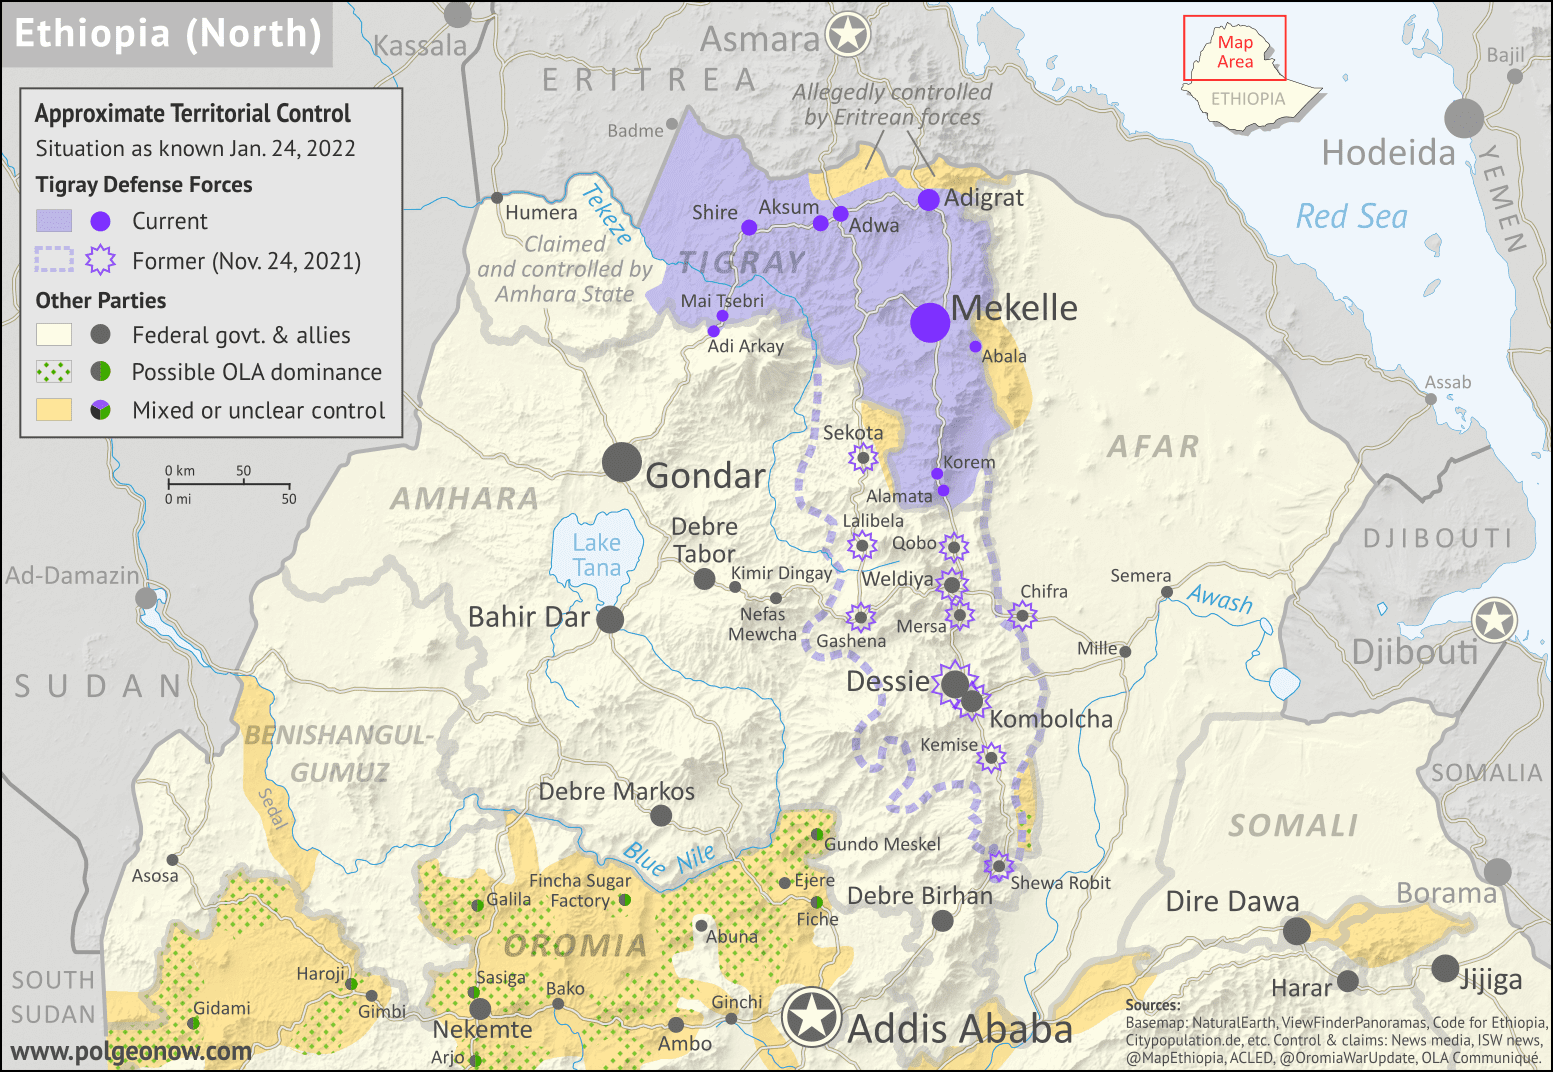 Ethiopia war map for late 2021 and early 2022, showing Tigray rebel control both at its height in November 2021, extending far down into Amhara state and near national capital Addis Ababa, and at present day (January 24, 2022). Also indicates areas claimed to be controlled by the Oromo Liberation Army in western and central Ethiopia. Colorblind accessible.